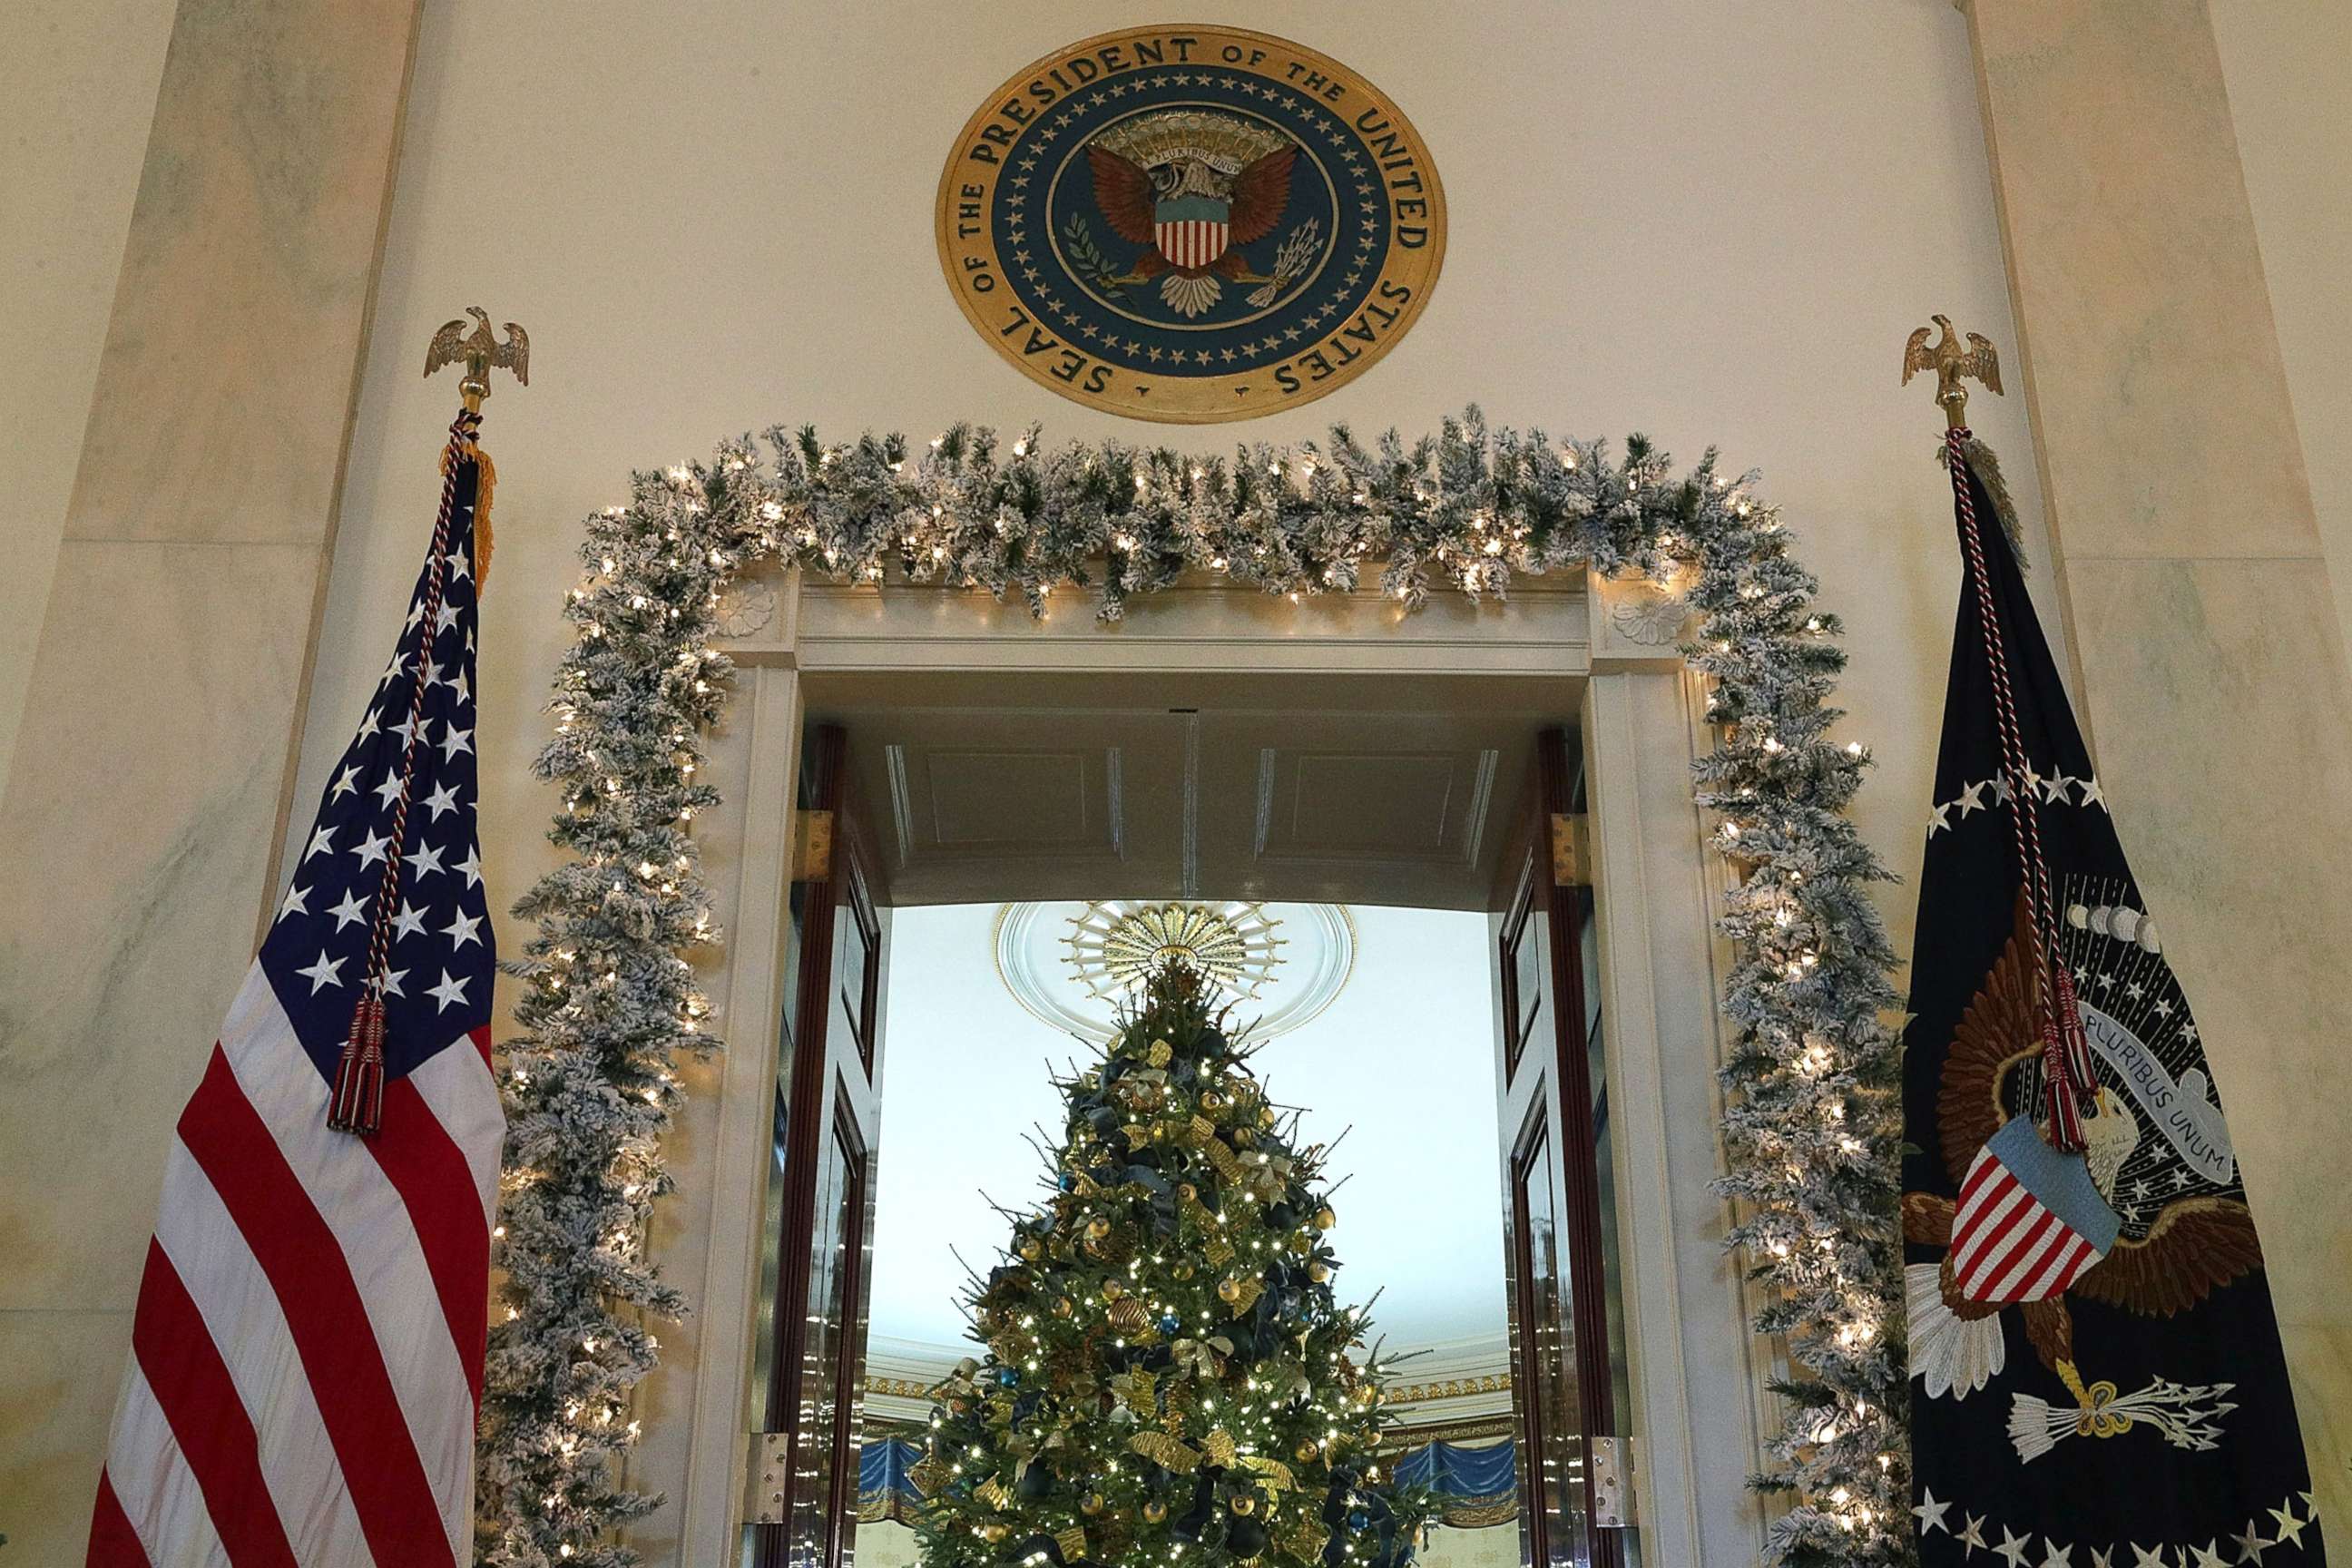 This year's White House Christmas ornament honors gingerbread tradition